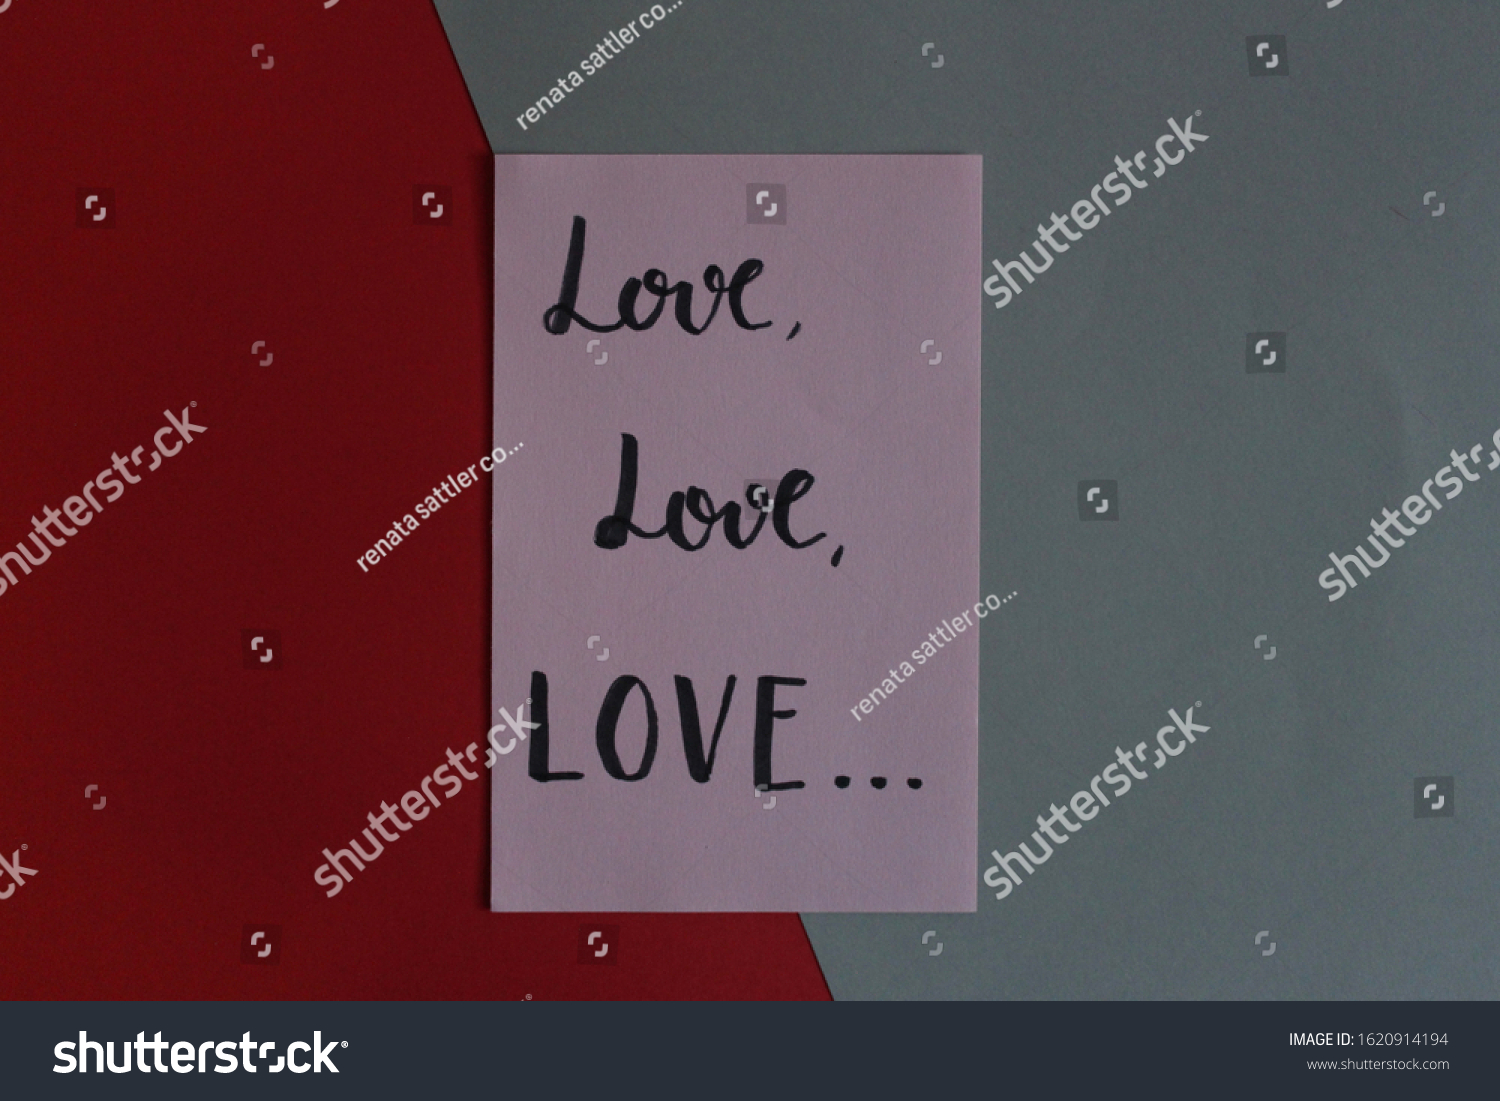 “Love love love” handwritten on pink paper about art composition on colored papers gray and red #1620914194